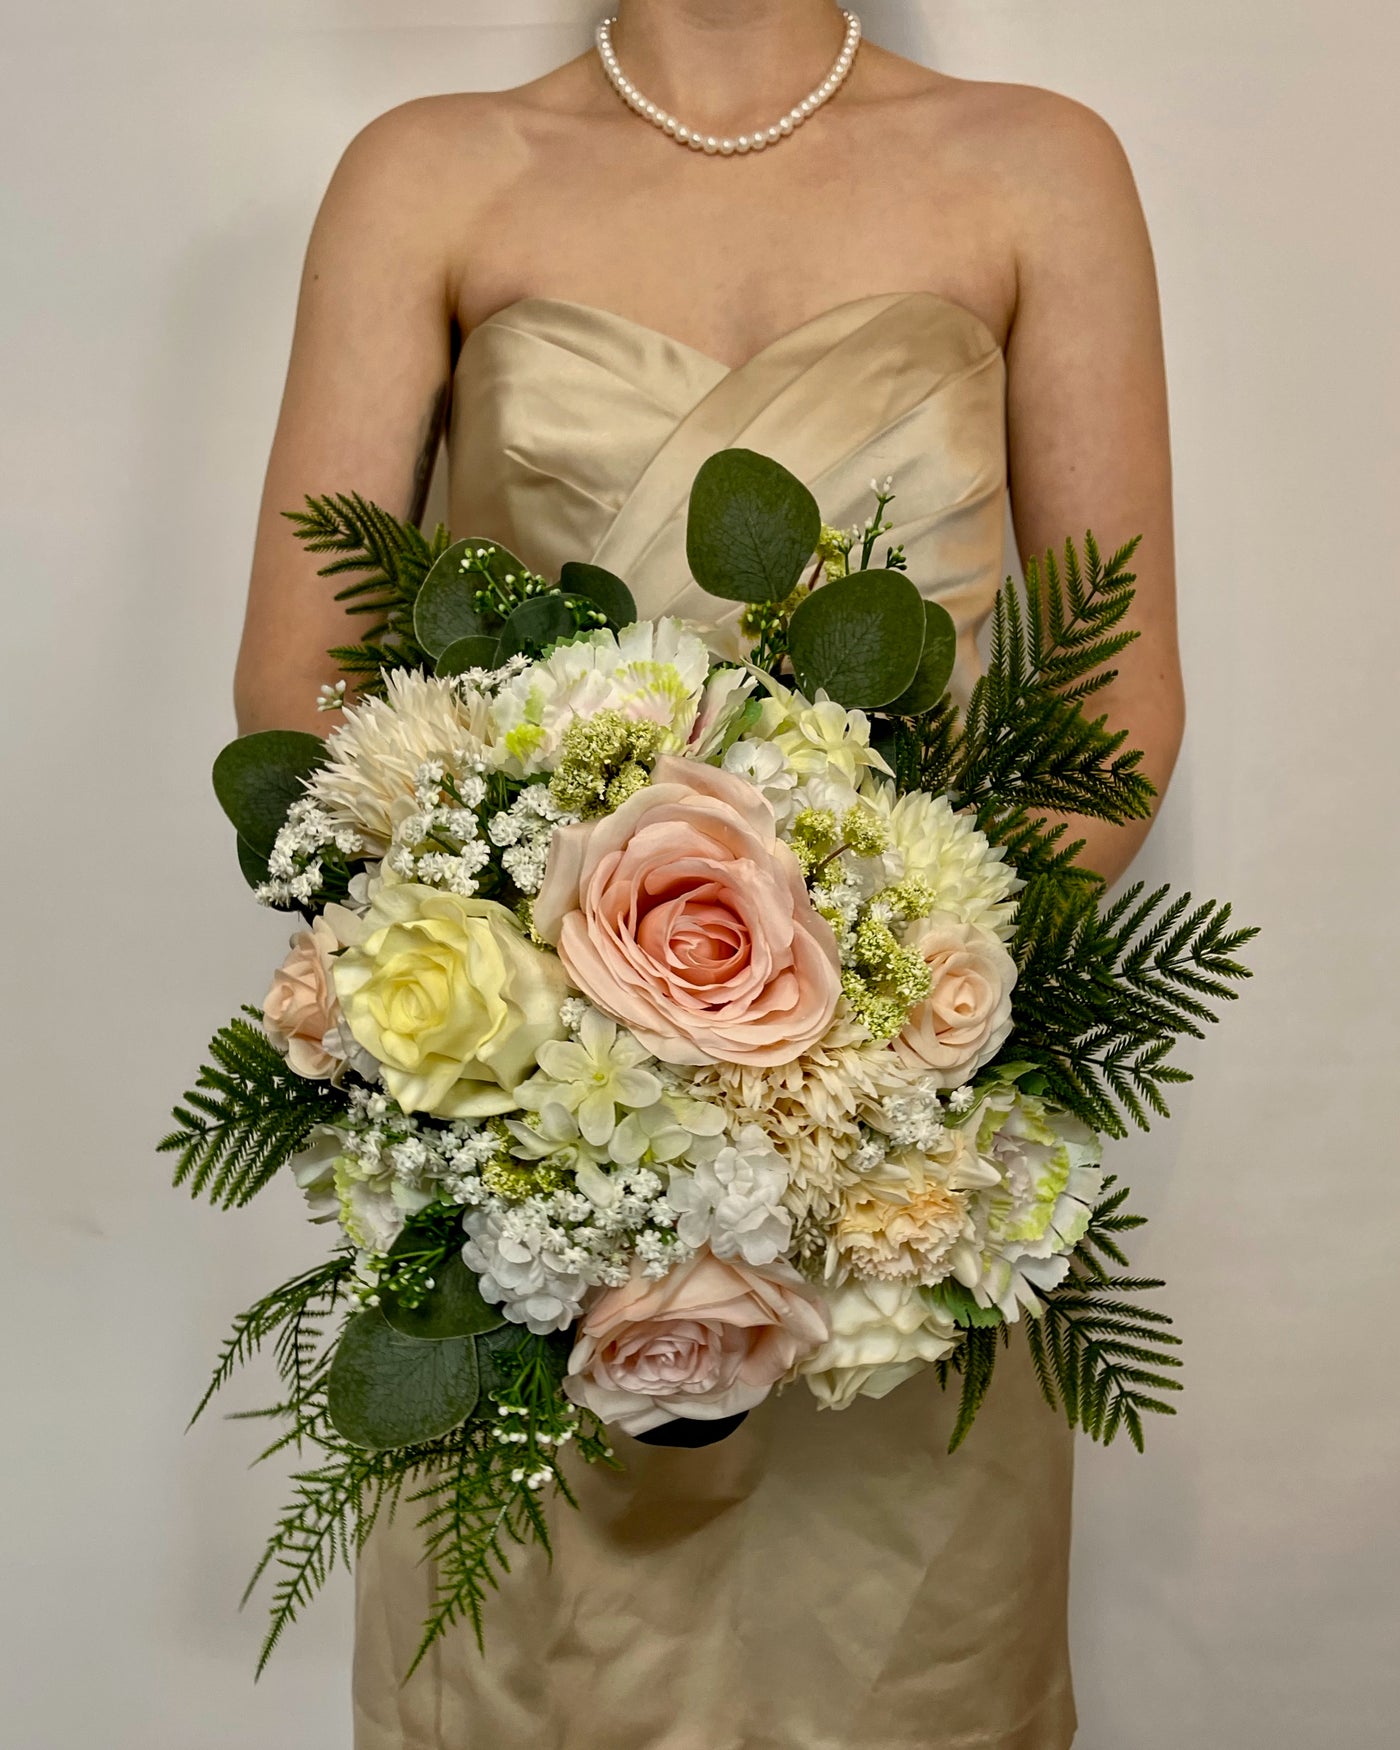 Rent a Rose-Bridesmaid Bouquet-  Cream , white and pale pink- rent for five days for $69.00